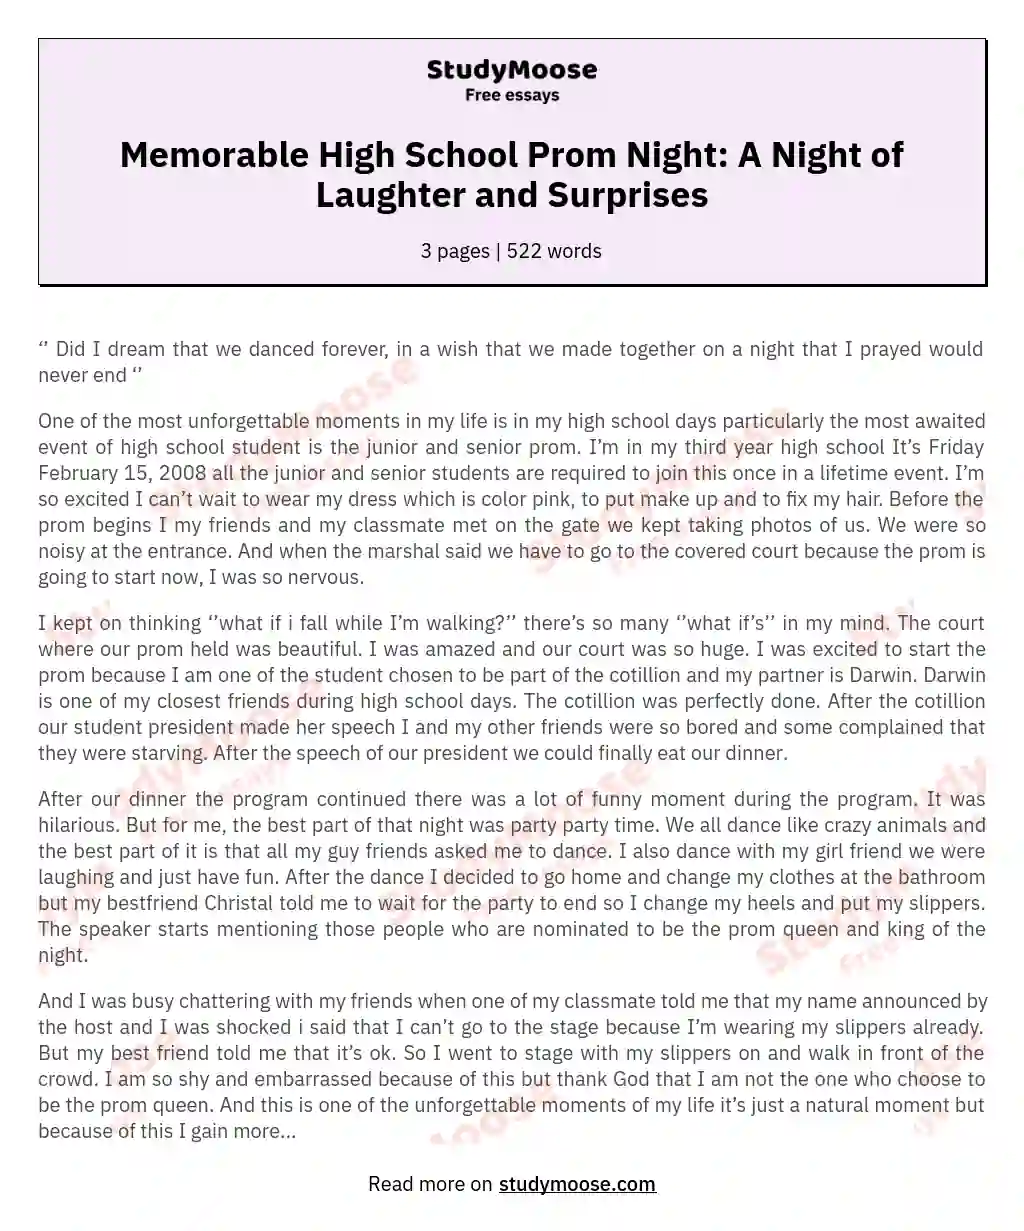 Memorable High School Prom Night: A Night of Laughter and Surprises essay